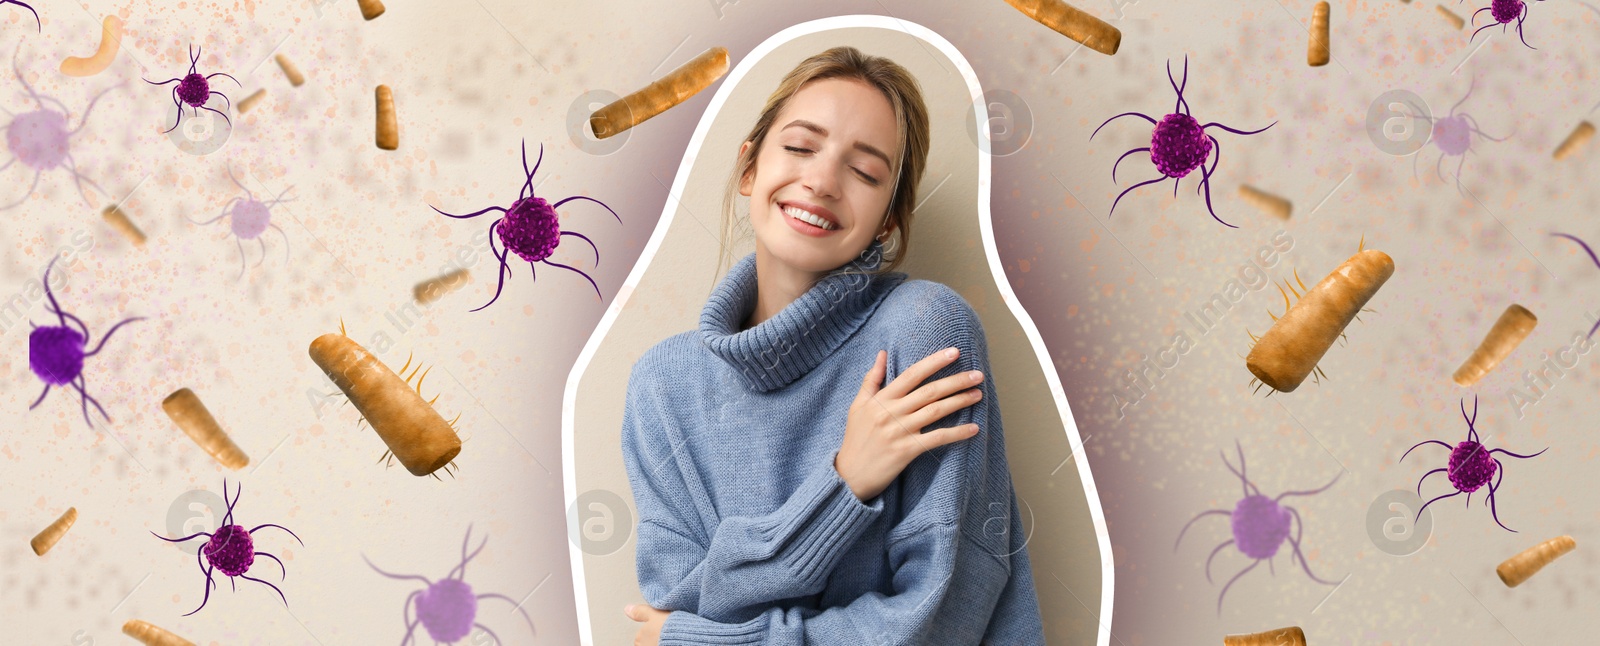 Image of Woman with strong immunity surrounded by viruses on beige background, banner design